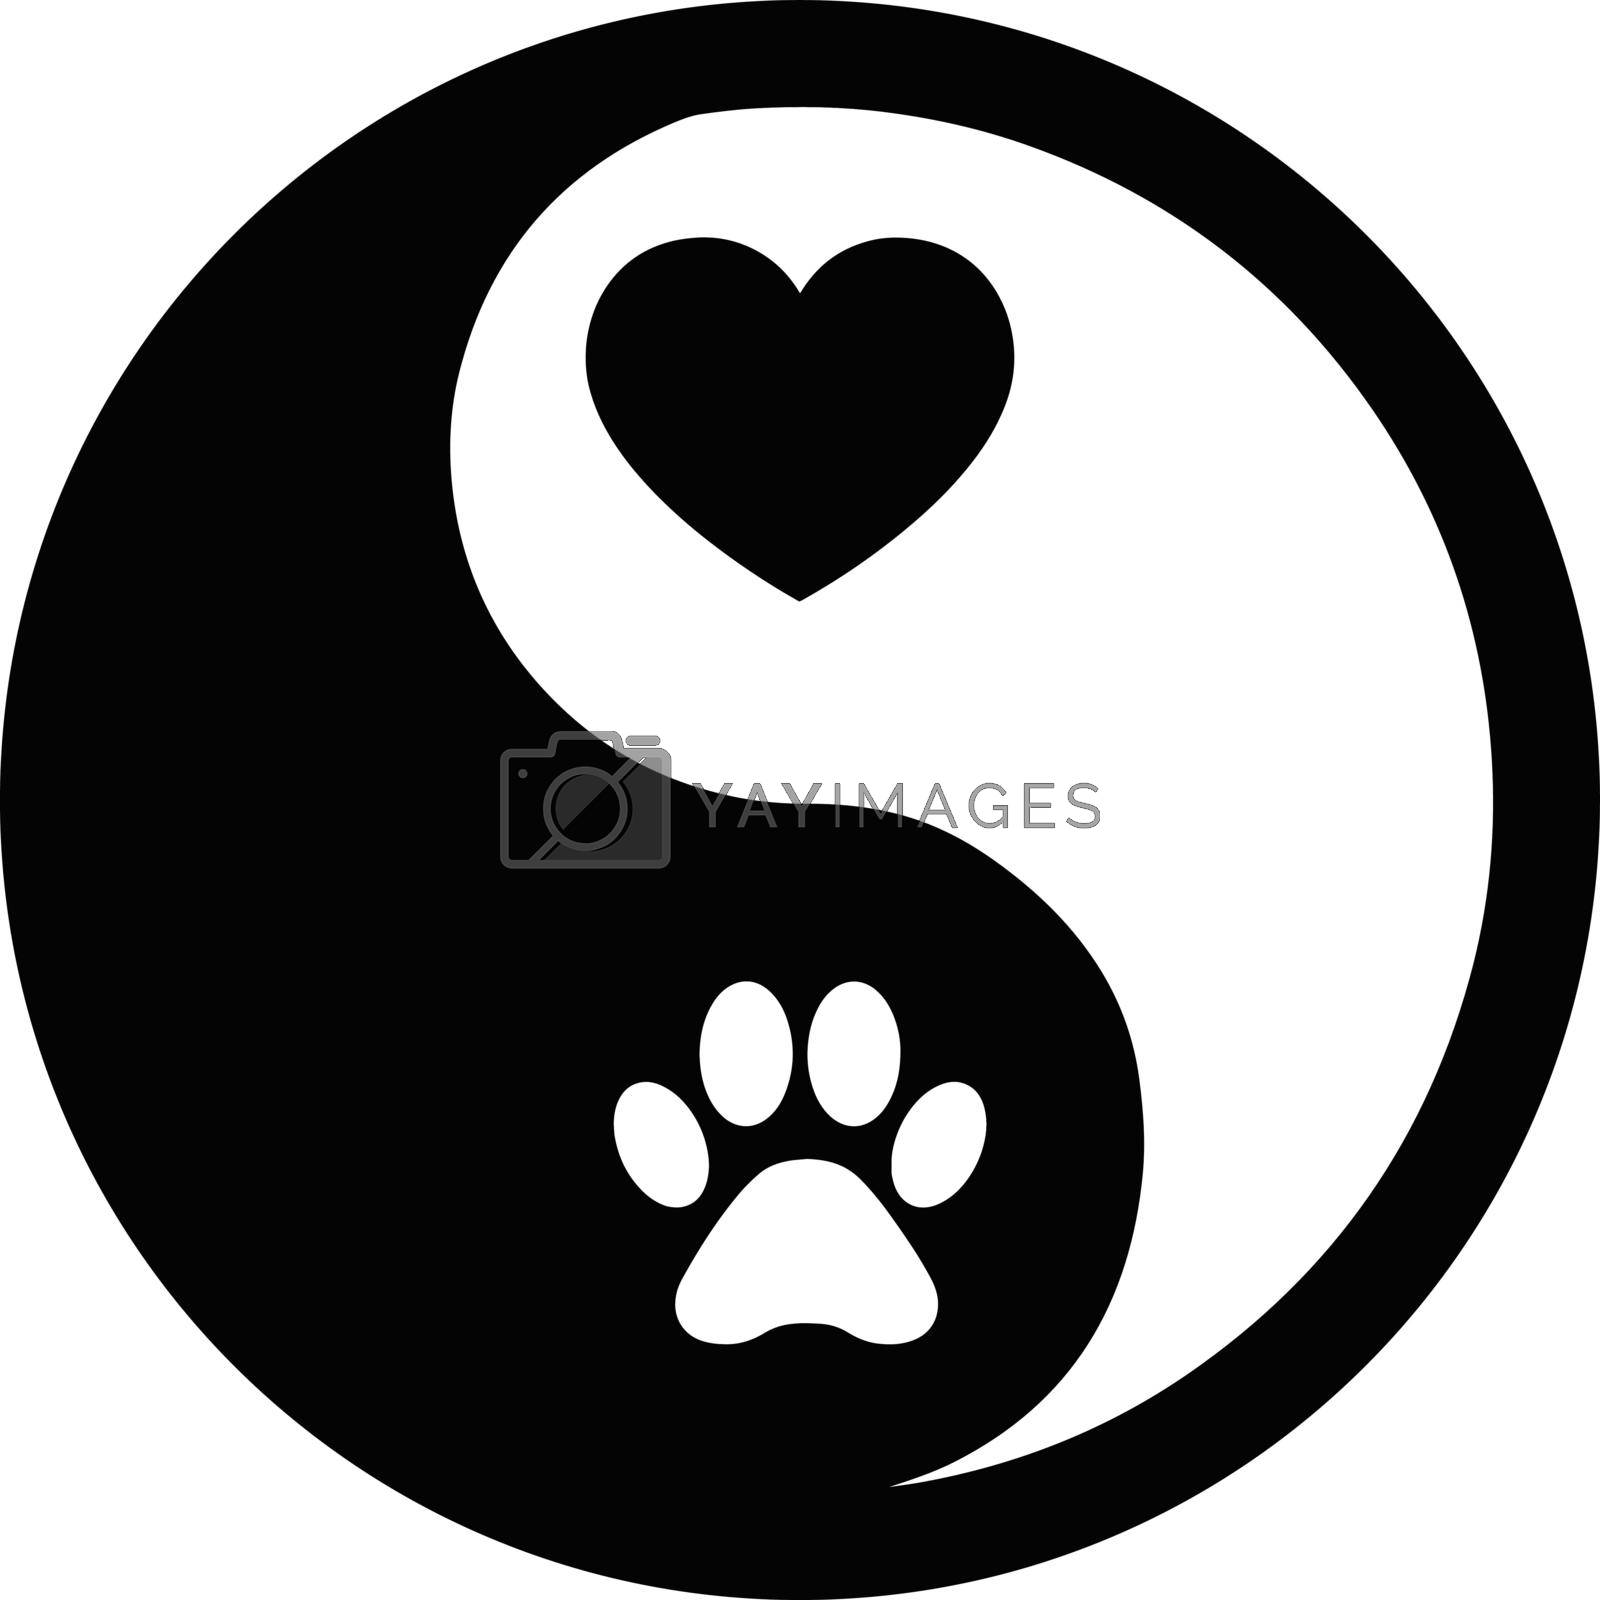 Royalty free image of Dog Paw Print Ying Yang Design Vector by toosweetinc